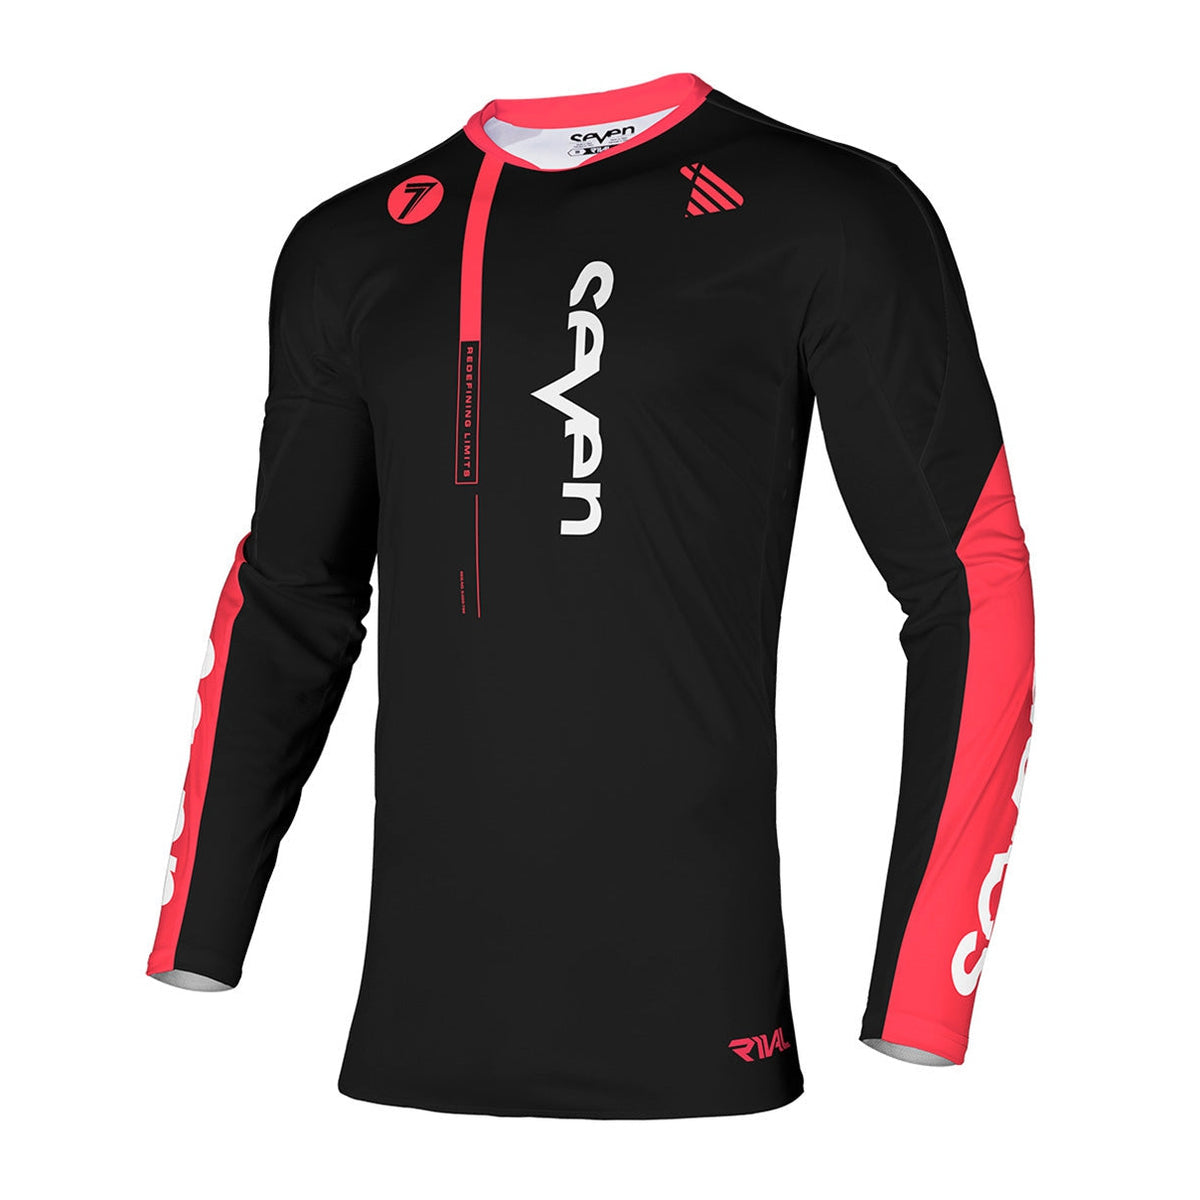 Seven Youth Rival Rift Jersey